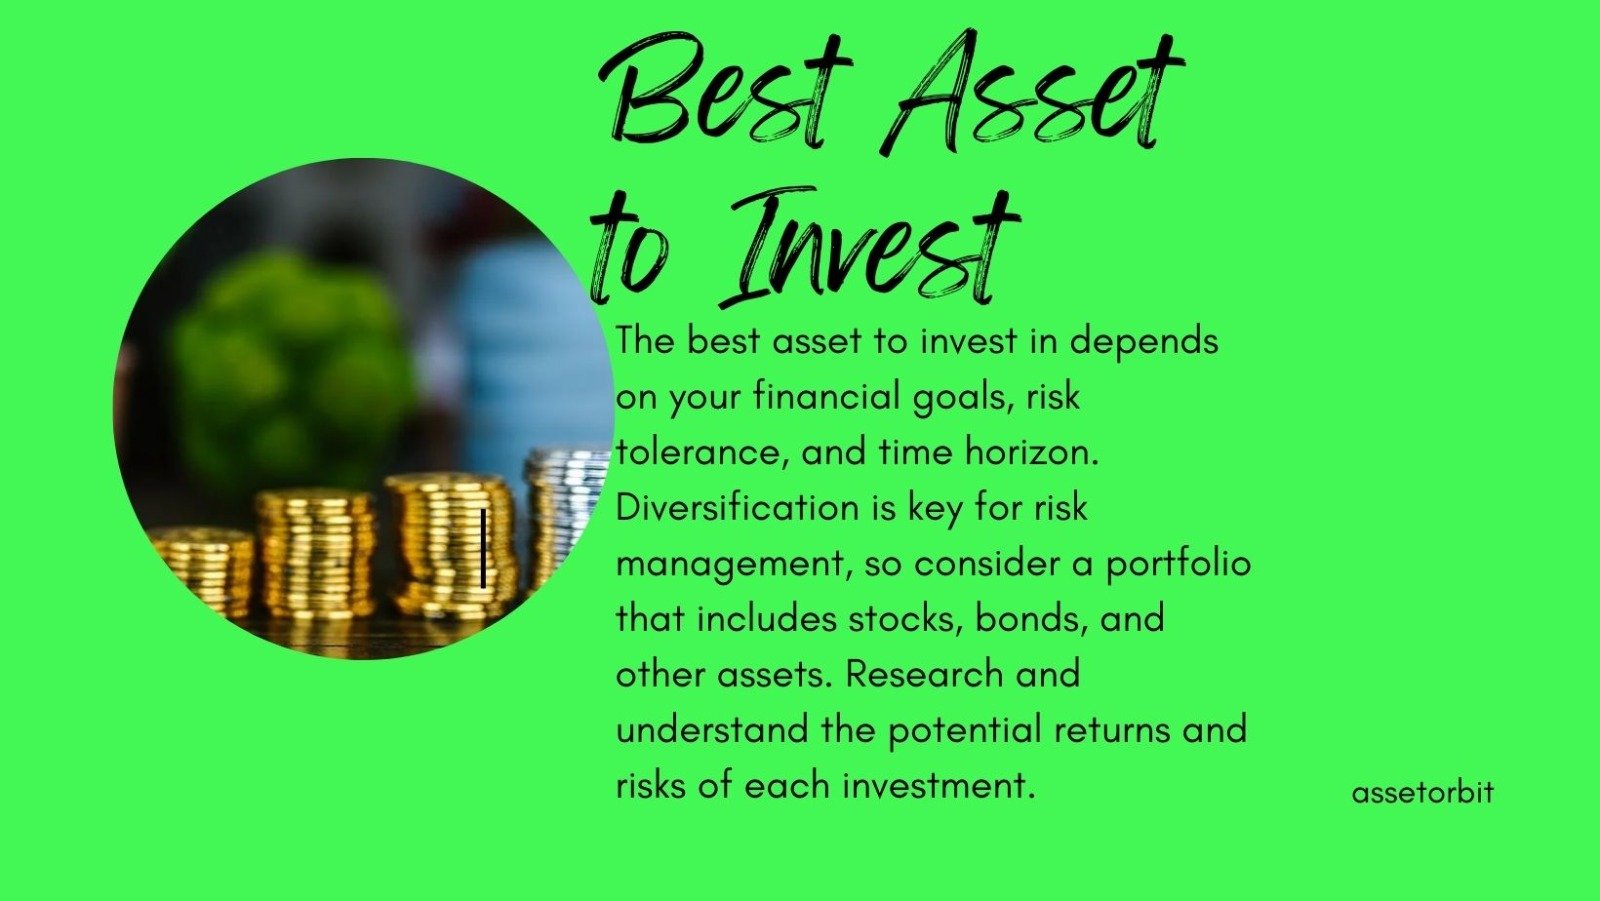 Best Asset to Invest